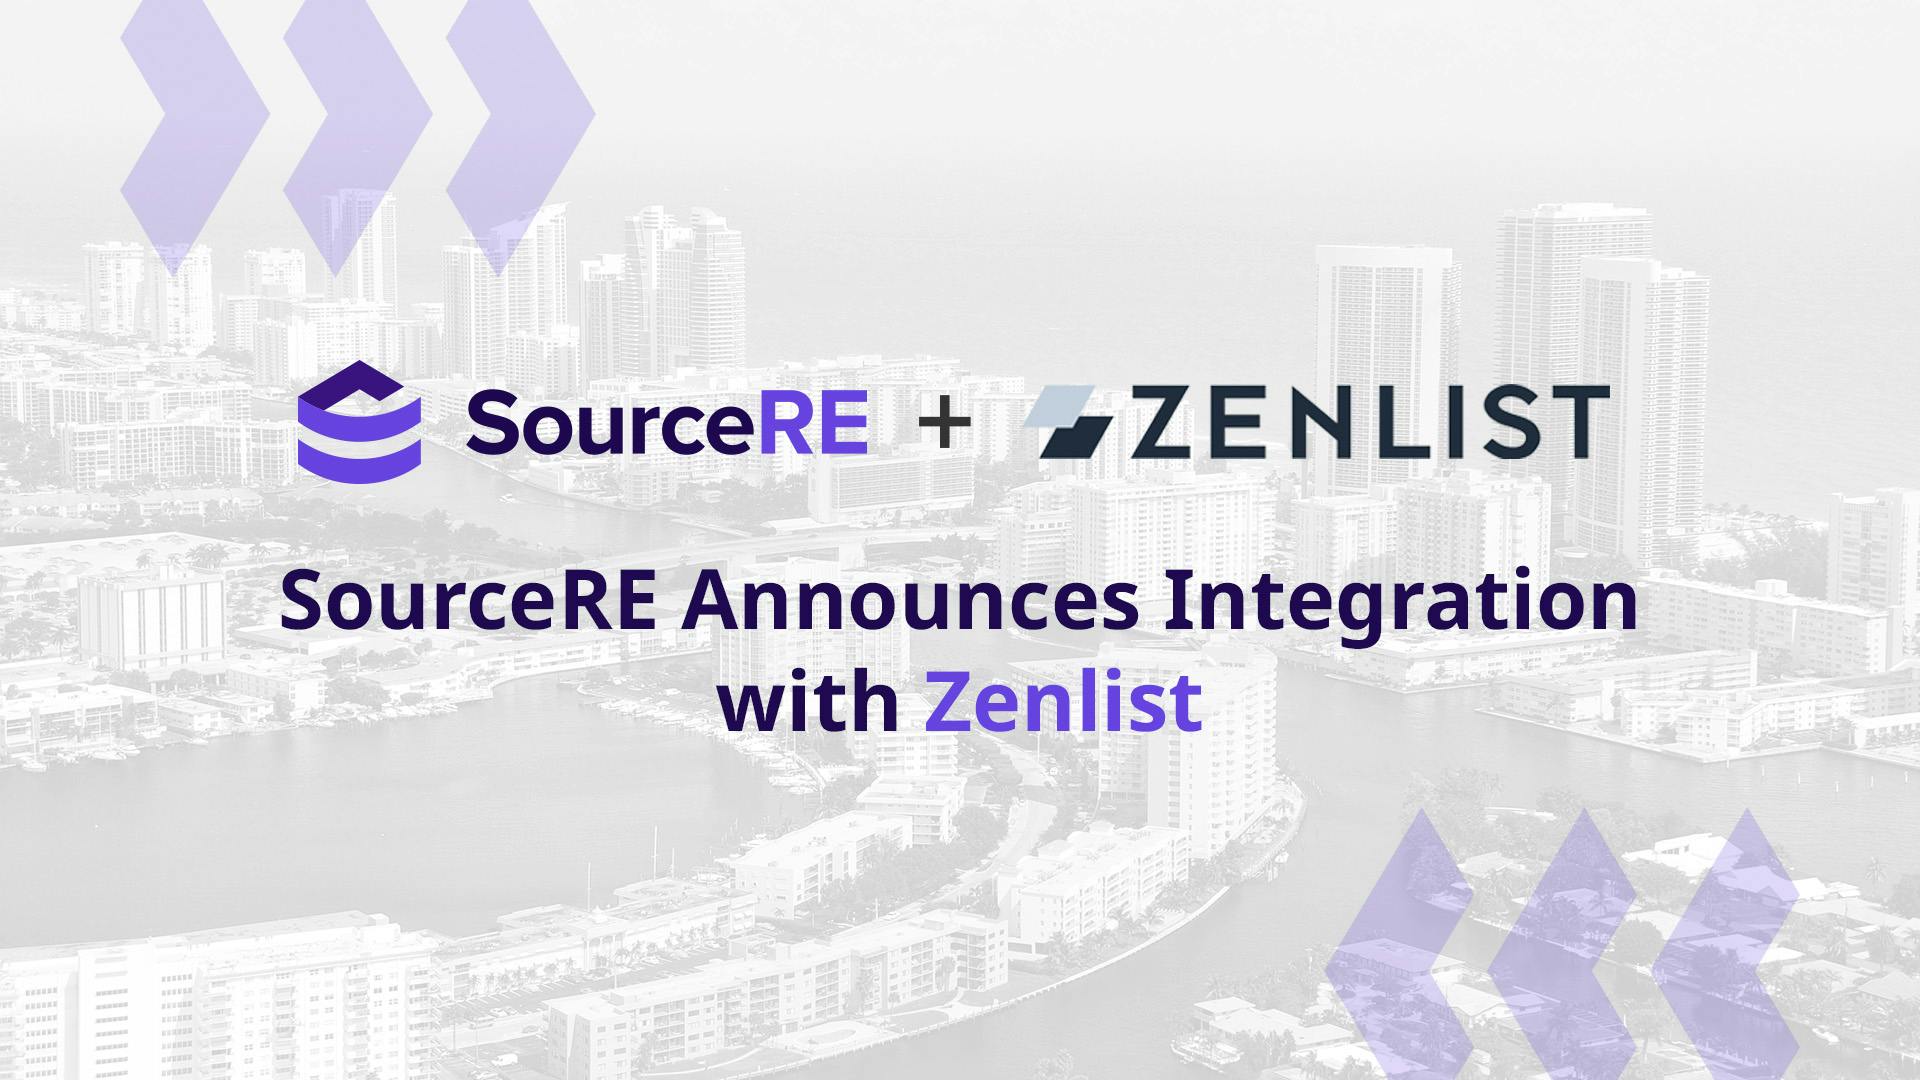 Zenlist and SourceRE Announce Add/Edit Integration and Business Rules Partnership2